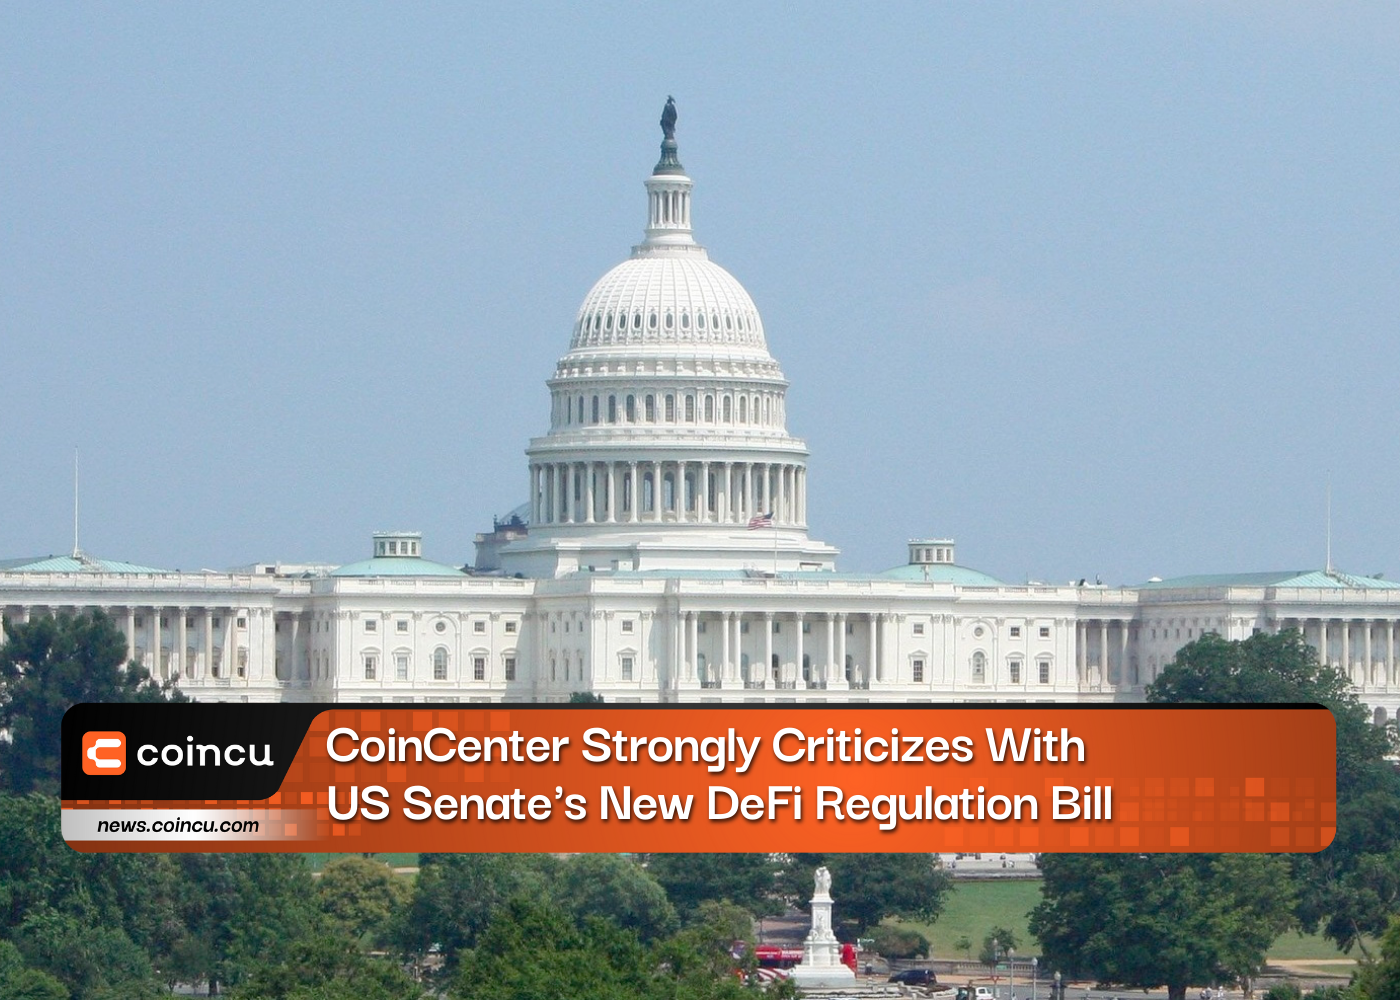 CoinCenter Strongly Criticizes With US Senate's New DeFi Regulation Bill